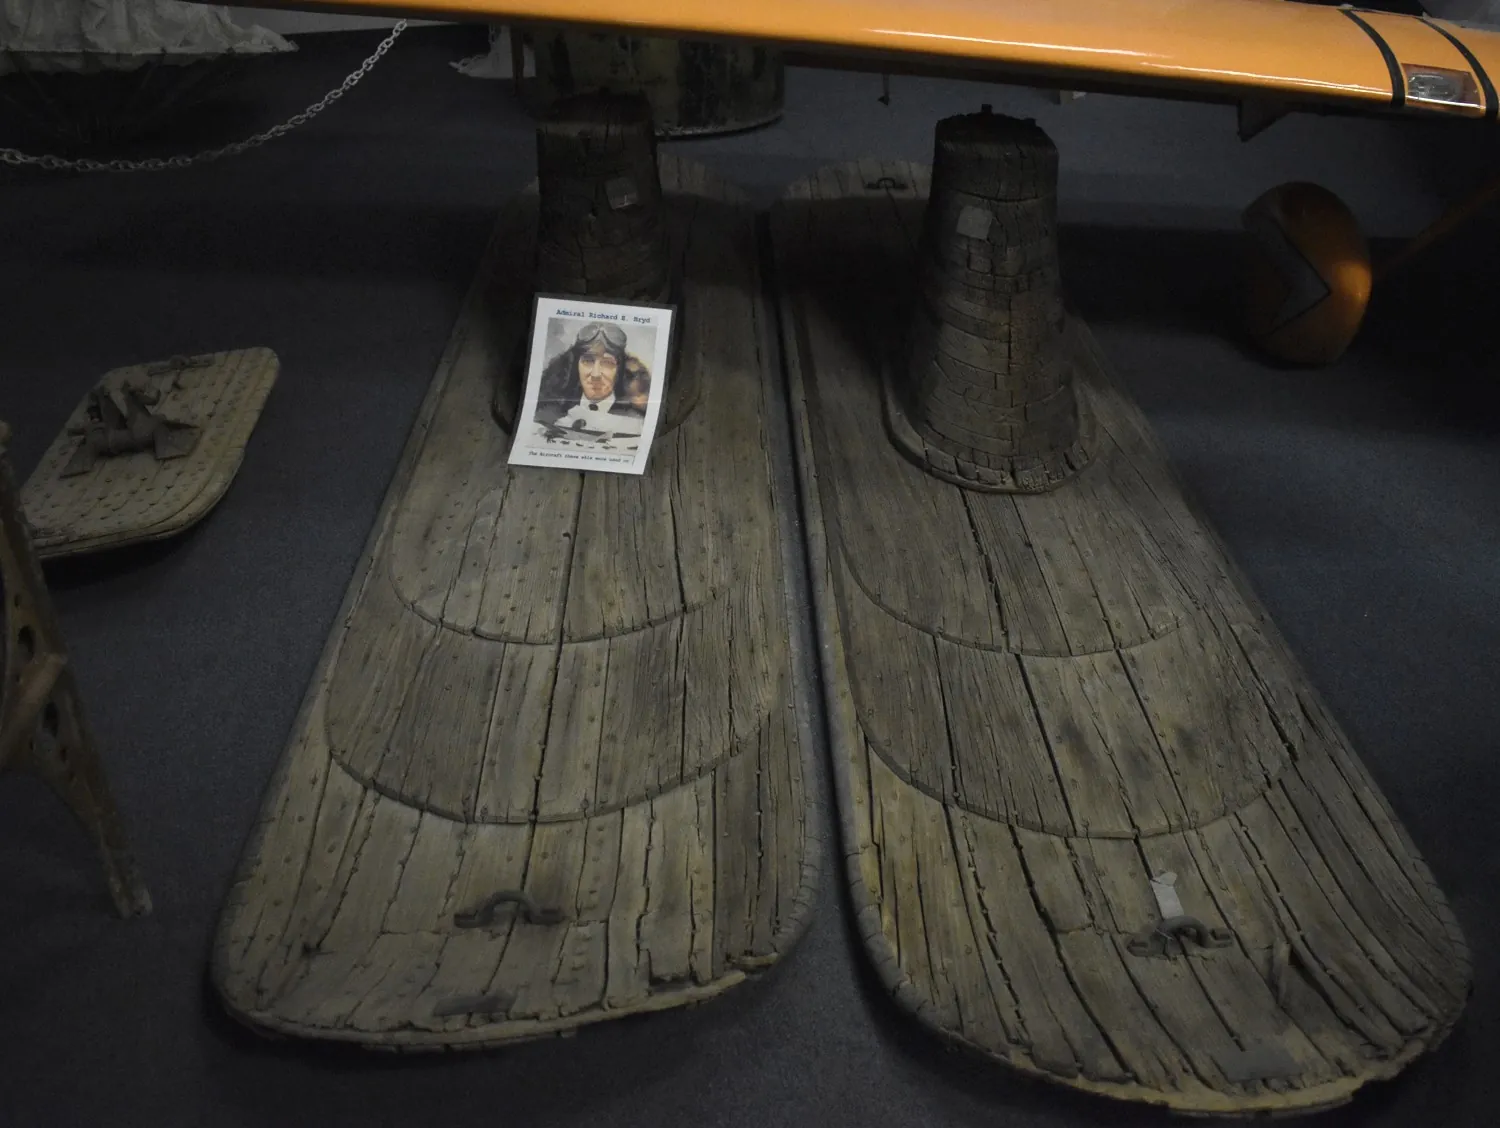 Skis of the plane that Richard E. Byrd used in his 1929 Antarctica expedition.